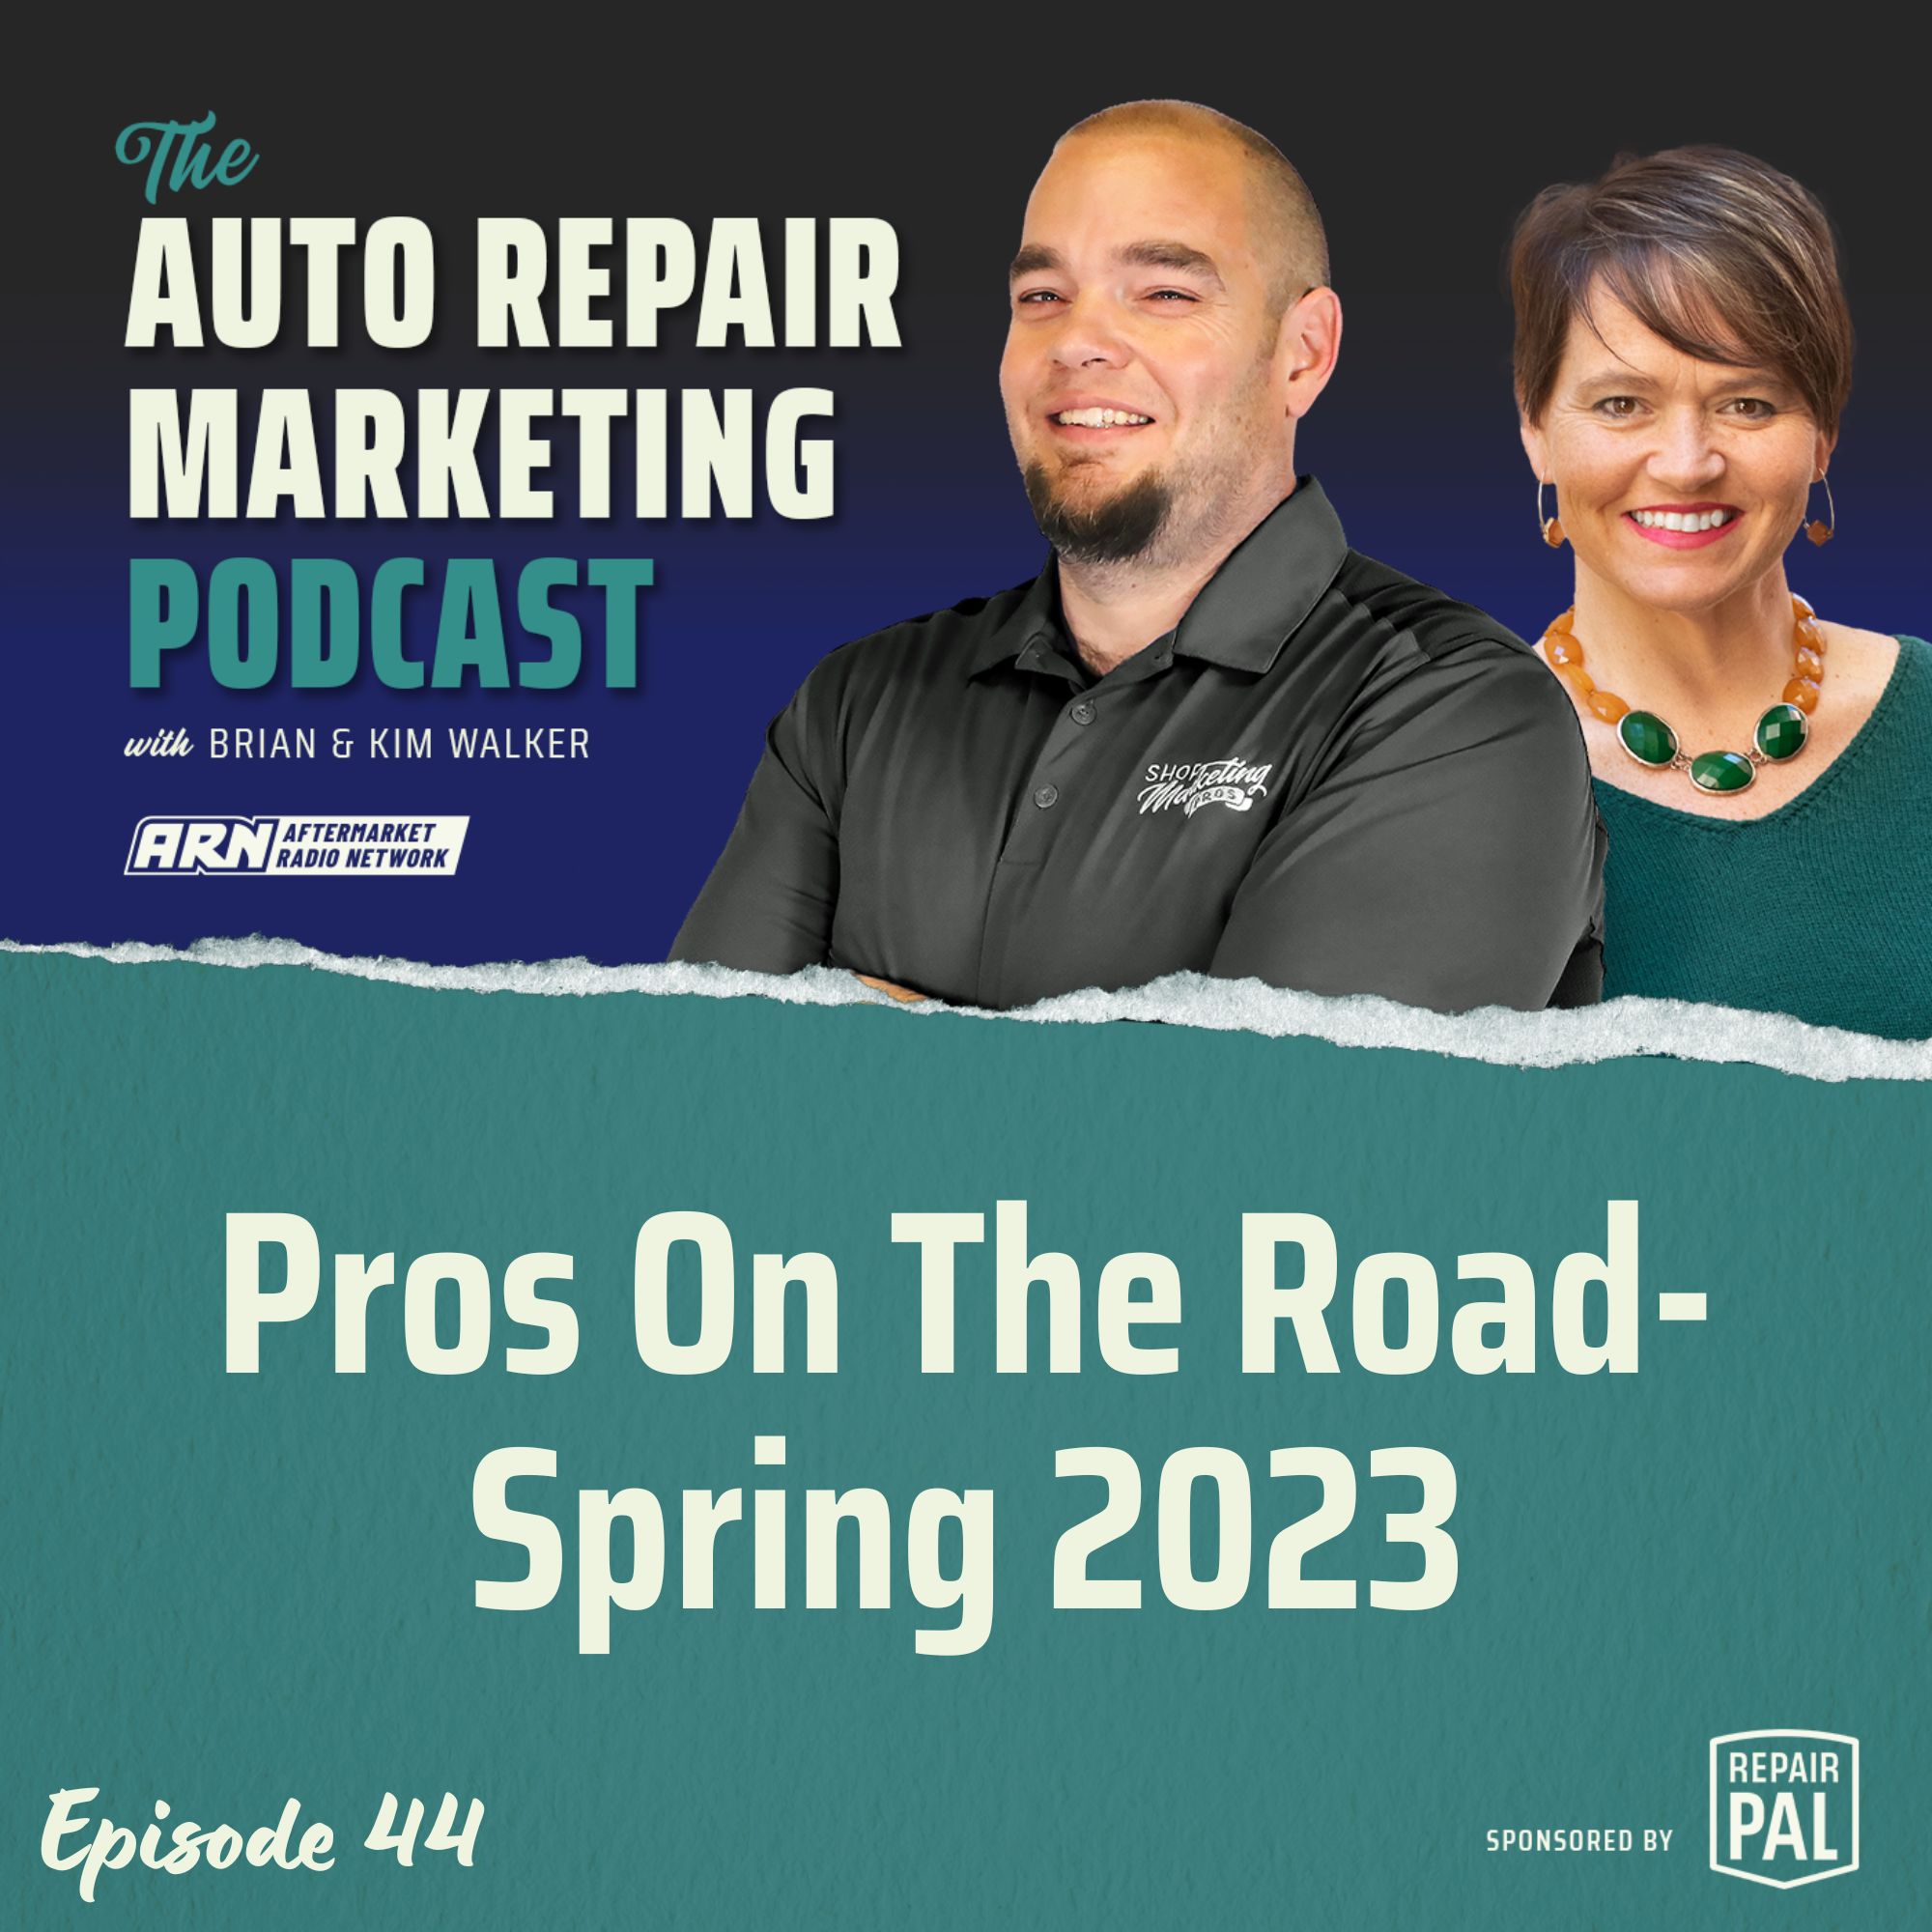 The Auto Repair Marketing Podcast Episode 44. Brian & Kim Walker talking about the topic "Pros On The Road - Spring 2023". Sponsored by Repair Pal.